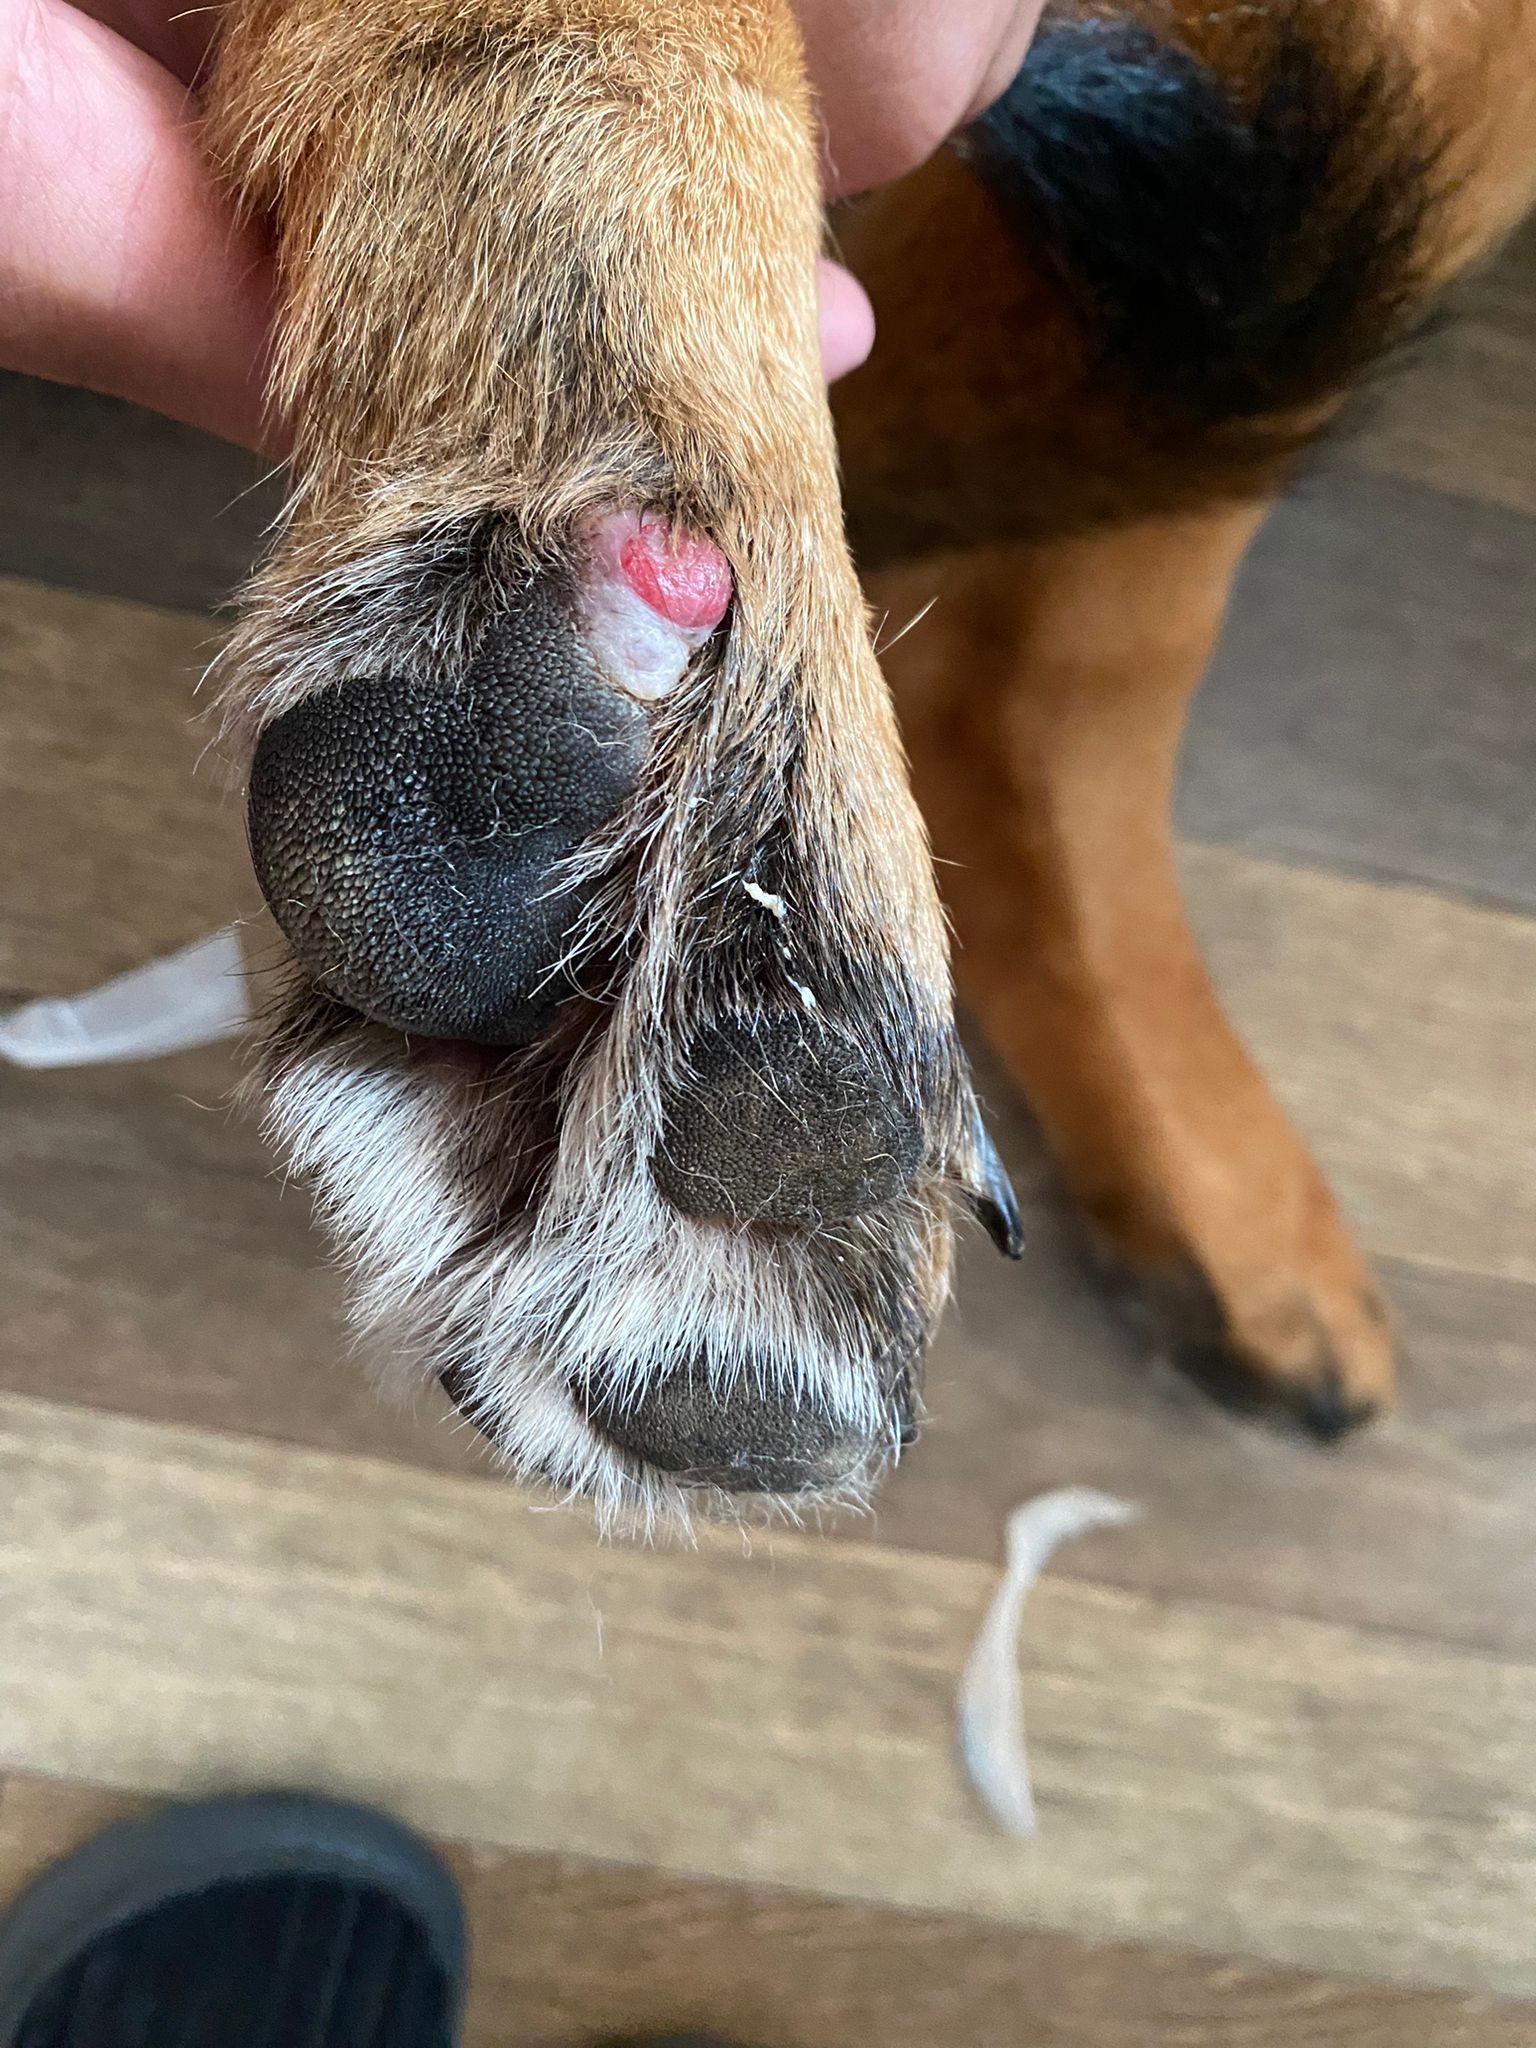 Growth on paw